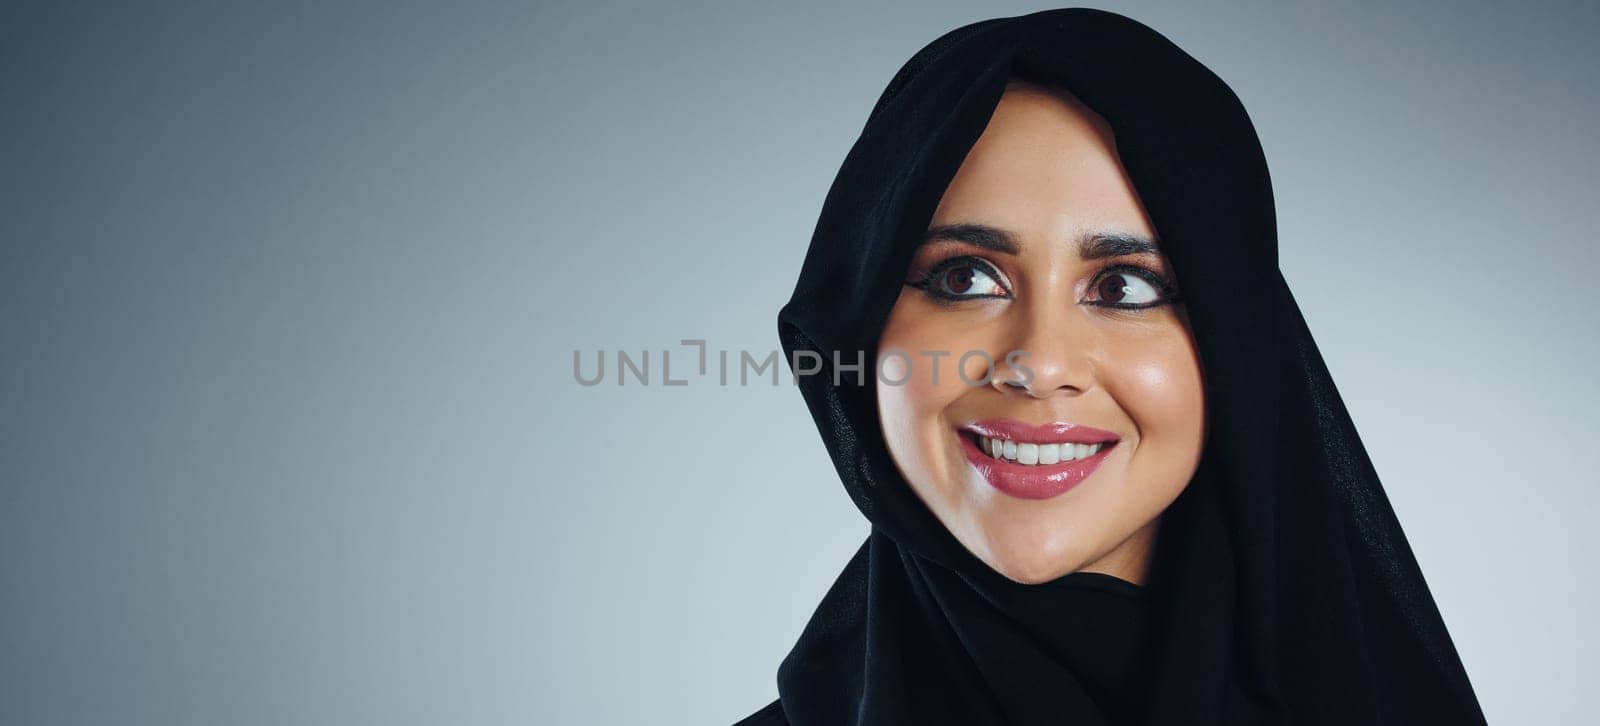 Positive thoughts become positive actions. Studio shot of a young muslim businesswoman against a grey background